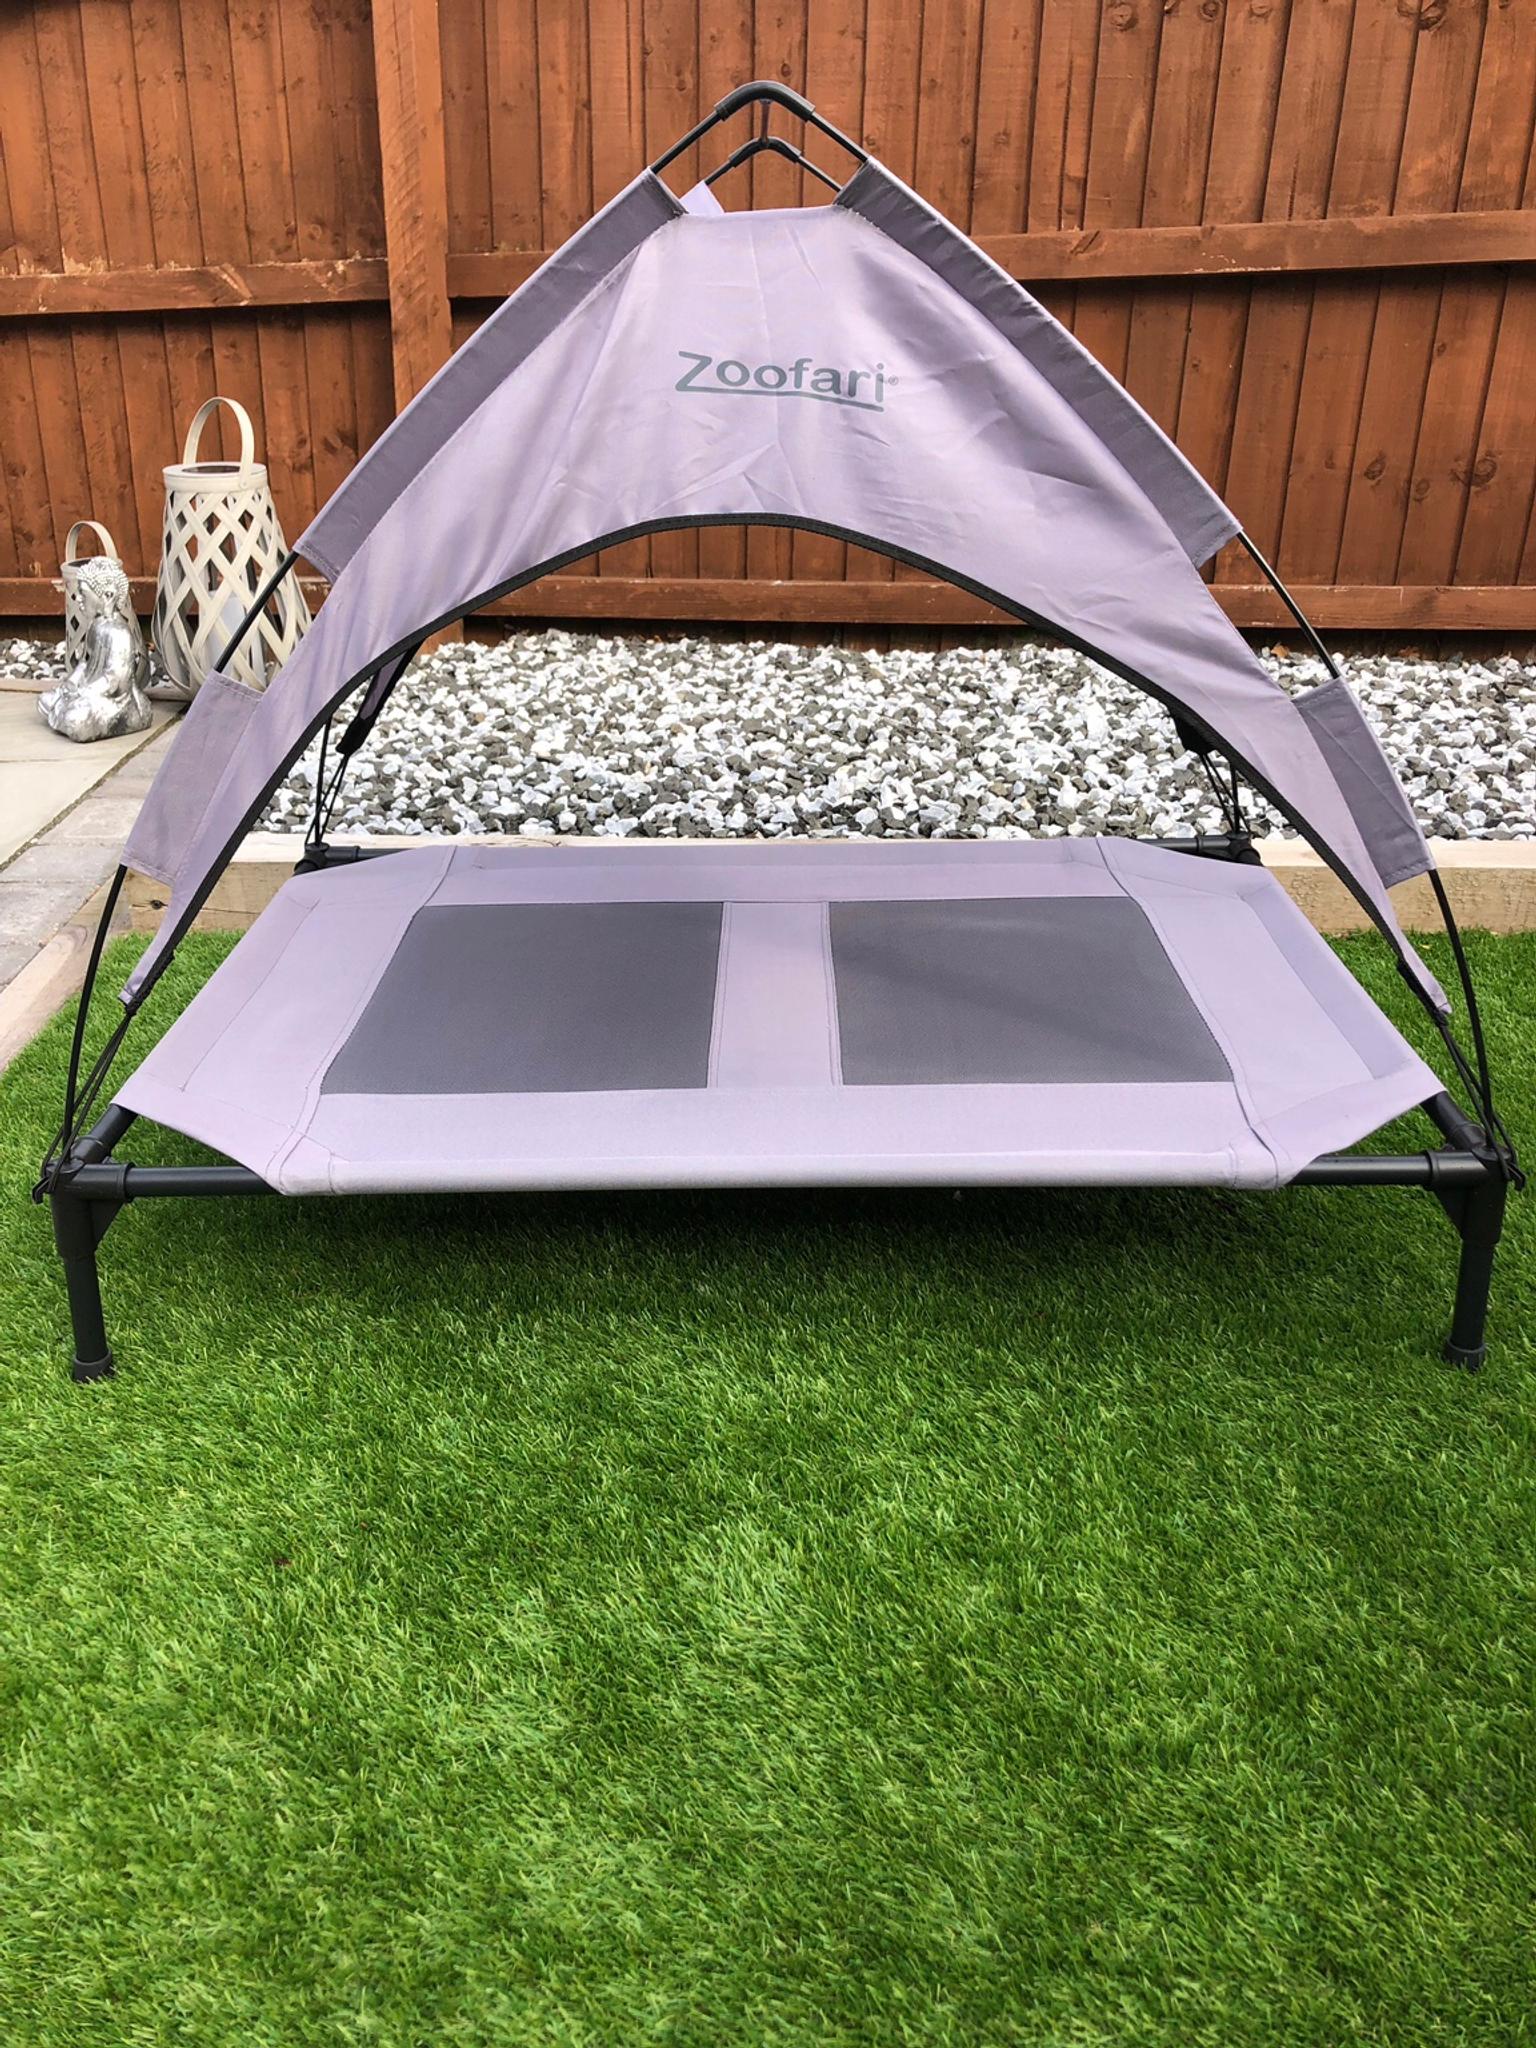 Zoofari Dog Cat Bed With Canopy Brand, Outdoor Dog Bed With Canopy Uk